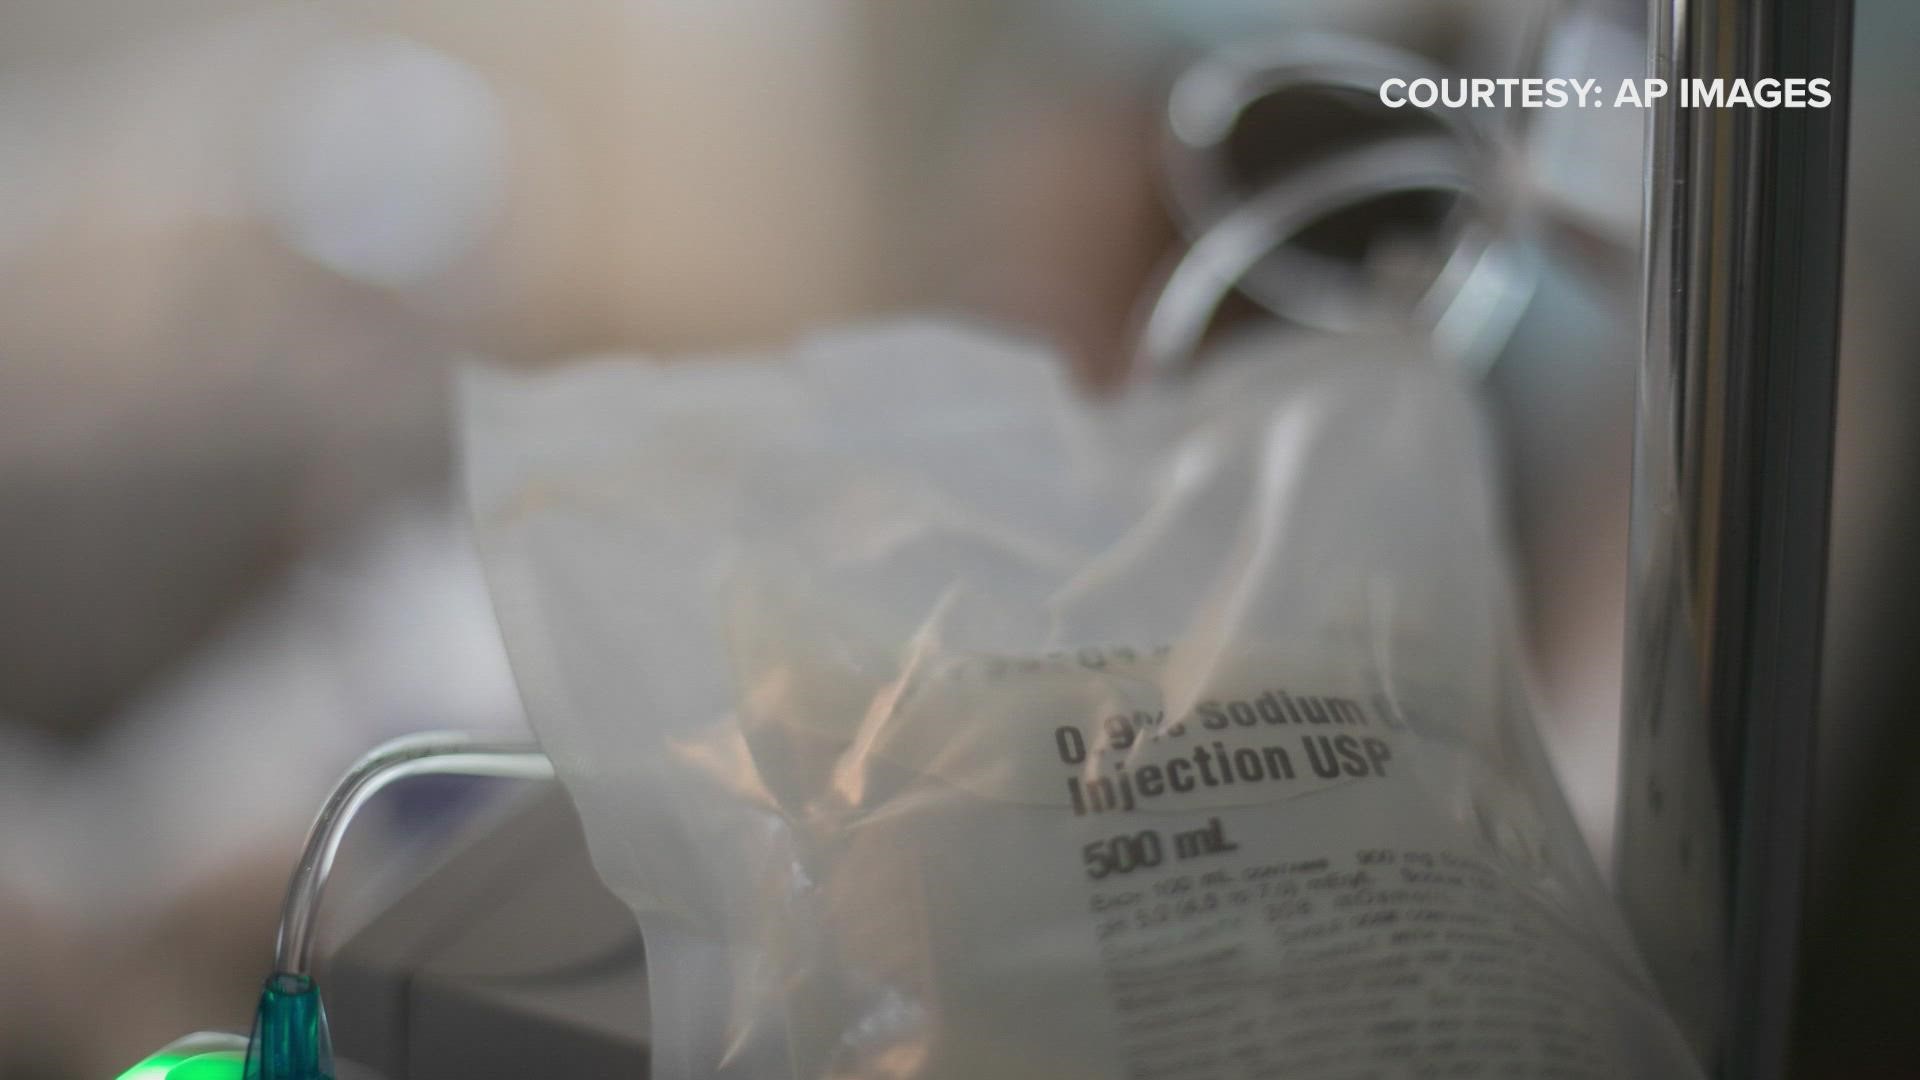 It was unclear what the IV bag was contaminated with or how it came to be.